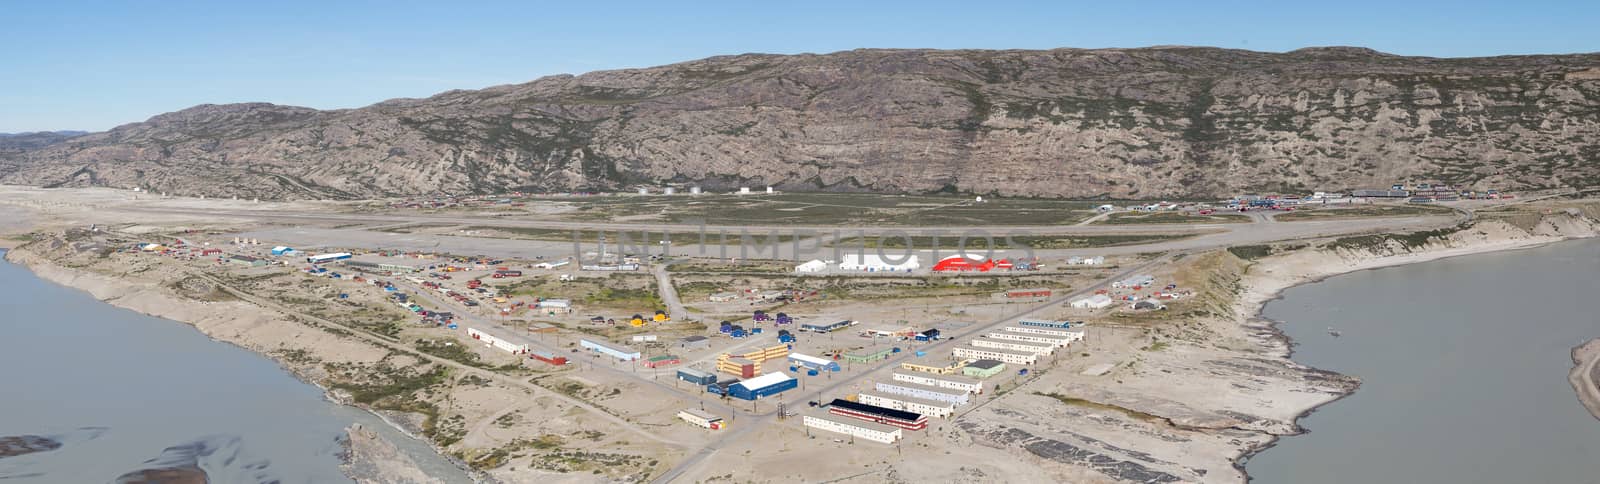 Panoramic view of Kangerlussuaq, Greenland by oliverfoerstner